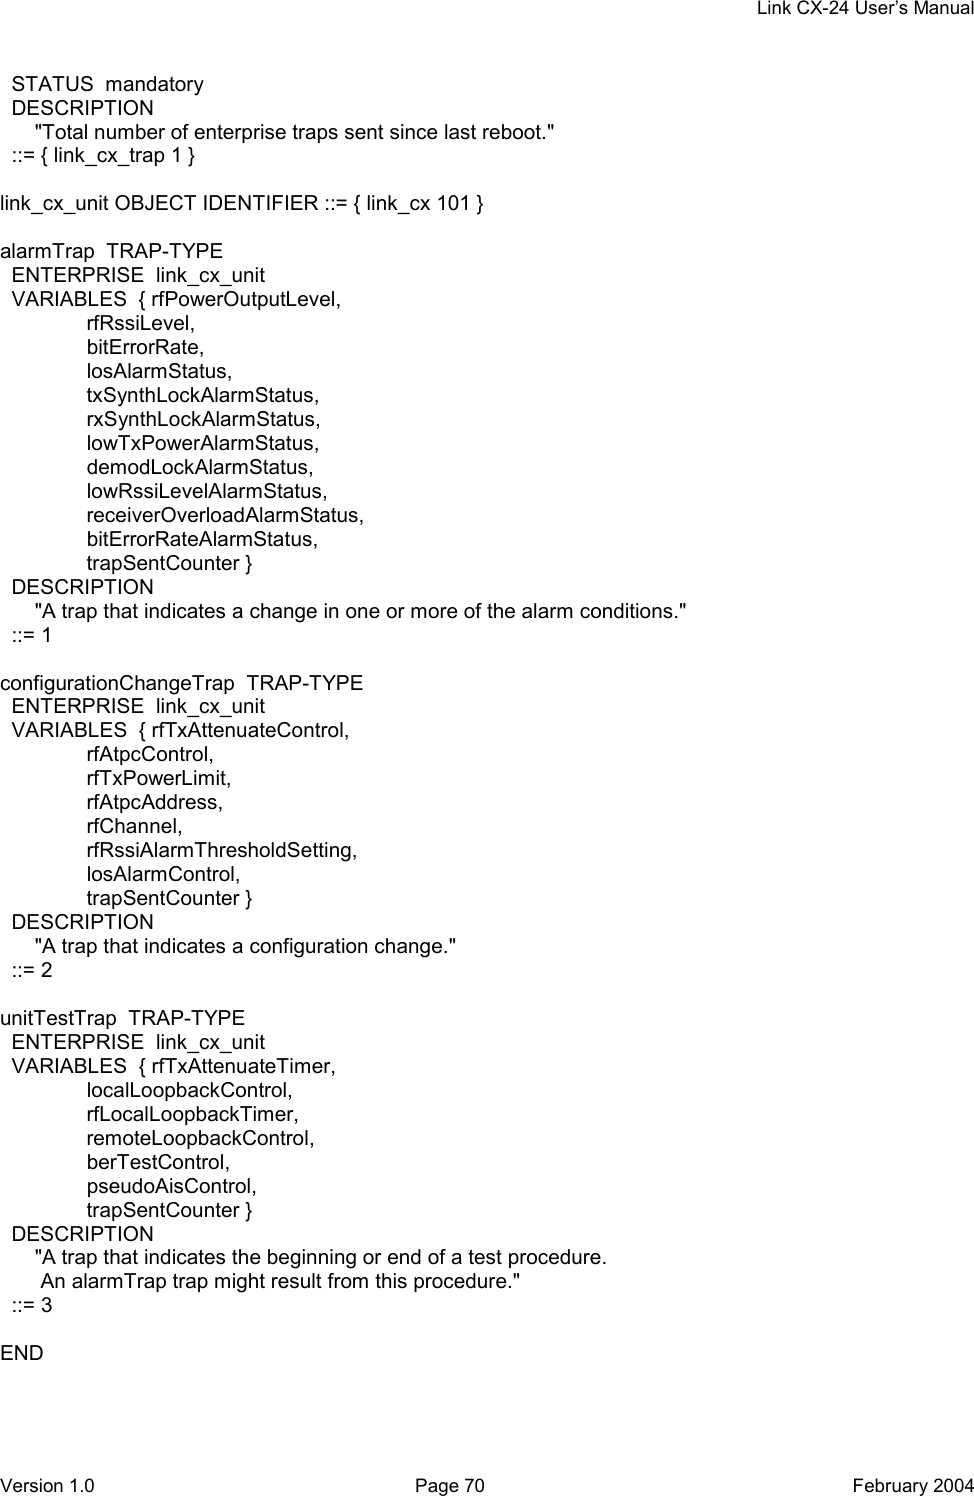     Link CX-24 User’s Manual Version 1.0  Page 70  February 2004   STATUS  mandatory   DESCRIPTION       &quot;Total number of enterprise traps sent since last reboot.&quot;   ::= { link_cx_trap 1 }  link_cx_unit OBJECT IDENTIFIER ::= { link_cx 101 }  alarmTrap  TRAP-TYPE   ENTERPRISE  link_cx_unit   VARIABLES  { rfPowerOutputLevel,                rfRssiLevel,                bitErrorRate,                losAlarmStatus,                txSynthLockAlarmStatus,                rxSynthLockAlarmStatus,                lowTxPowerAlarmStatus,                demodLockAlarmStatus,                lowRssiLevelAlarmStatus,                receiverOverloadAlarmStatus,                bitErrorRateAlarmStatus,                trapSentCounter }   DESCRIPTION       &quot;A trap that indicates a change in one or more of the alarm conditions.&quot;   ::= 1  configurationChangeTrap  TRAP-TYPE   ENTERPRISE  link_cx_unit   VARIABLES  { rfTxAttenuateControl,                 rfAtpcControl,                rfTxPowerLimit,                rfAtpcAddress,                rfChannel,                rfRssiAlarmThresholdSetting,                losAlarmControl,                trapSentCounter }   DESCRIPTION       &quot;A trap that indicates a configuration change.&quot;   ::= 2  unitTestTrap  TRAP-TYPE   ENTERPRISE  link_cx_unit   VARIABLES  { rfTxAttenuateTimer,                localLoopbackControl,                rfLocalLoopbackTimer,                remoteLoopbackControl,                berTestControl,                pseudoAisControl,                trapSentCounter }   DESCRIPTION       &quot;A trap that indicates the beginning or end of a test procedure.        An alarmTrap trap might result from this procedure.&quot;   ::= 3  END 